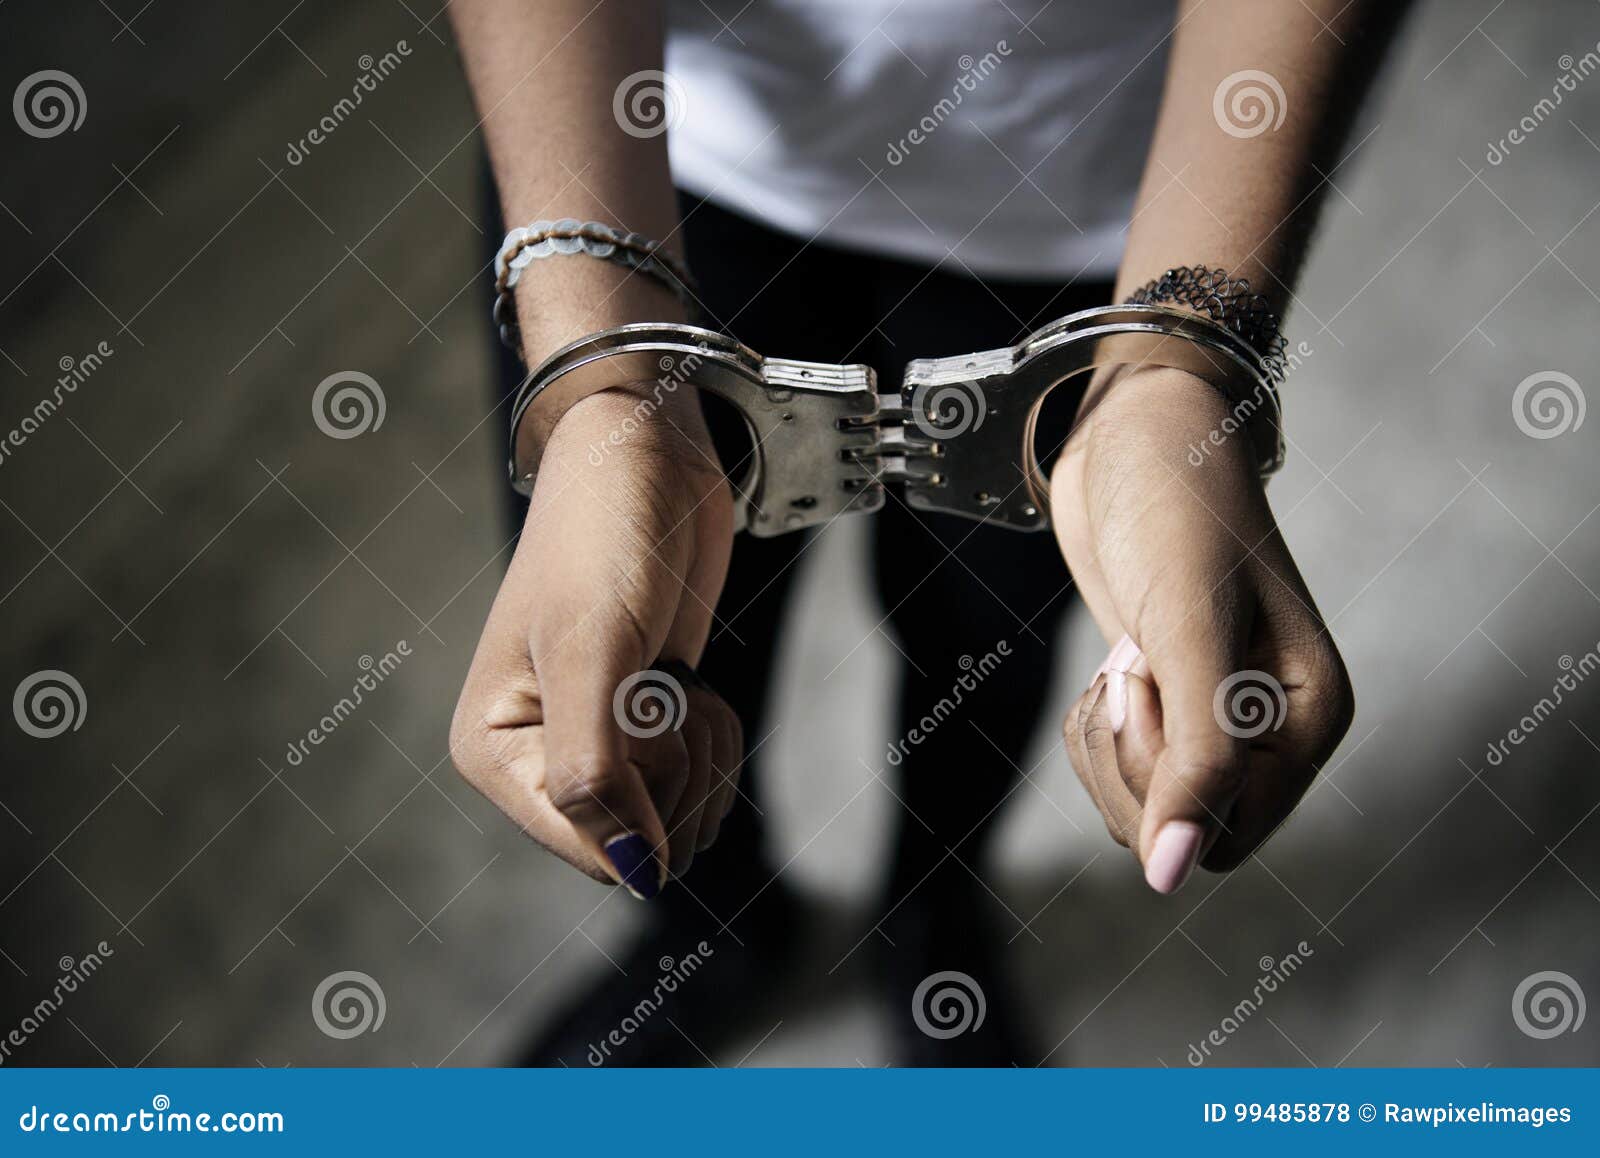 Arrested Woman In Handcuffs Royalty-Free Stock Photo | CartoonDealer ...